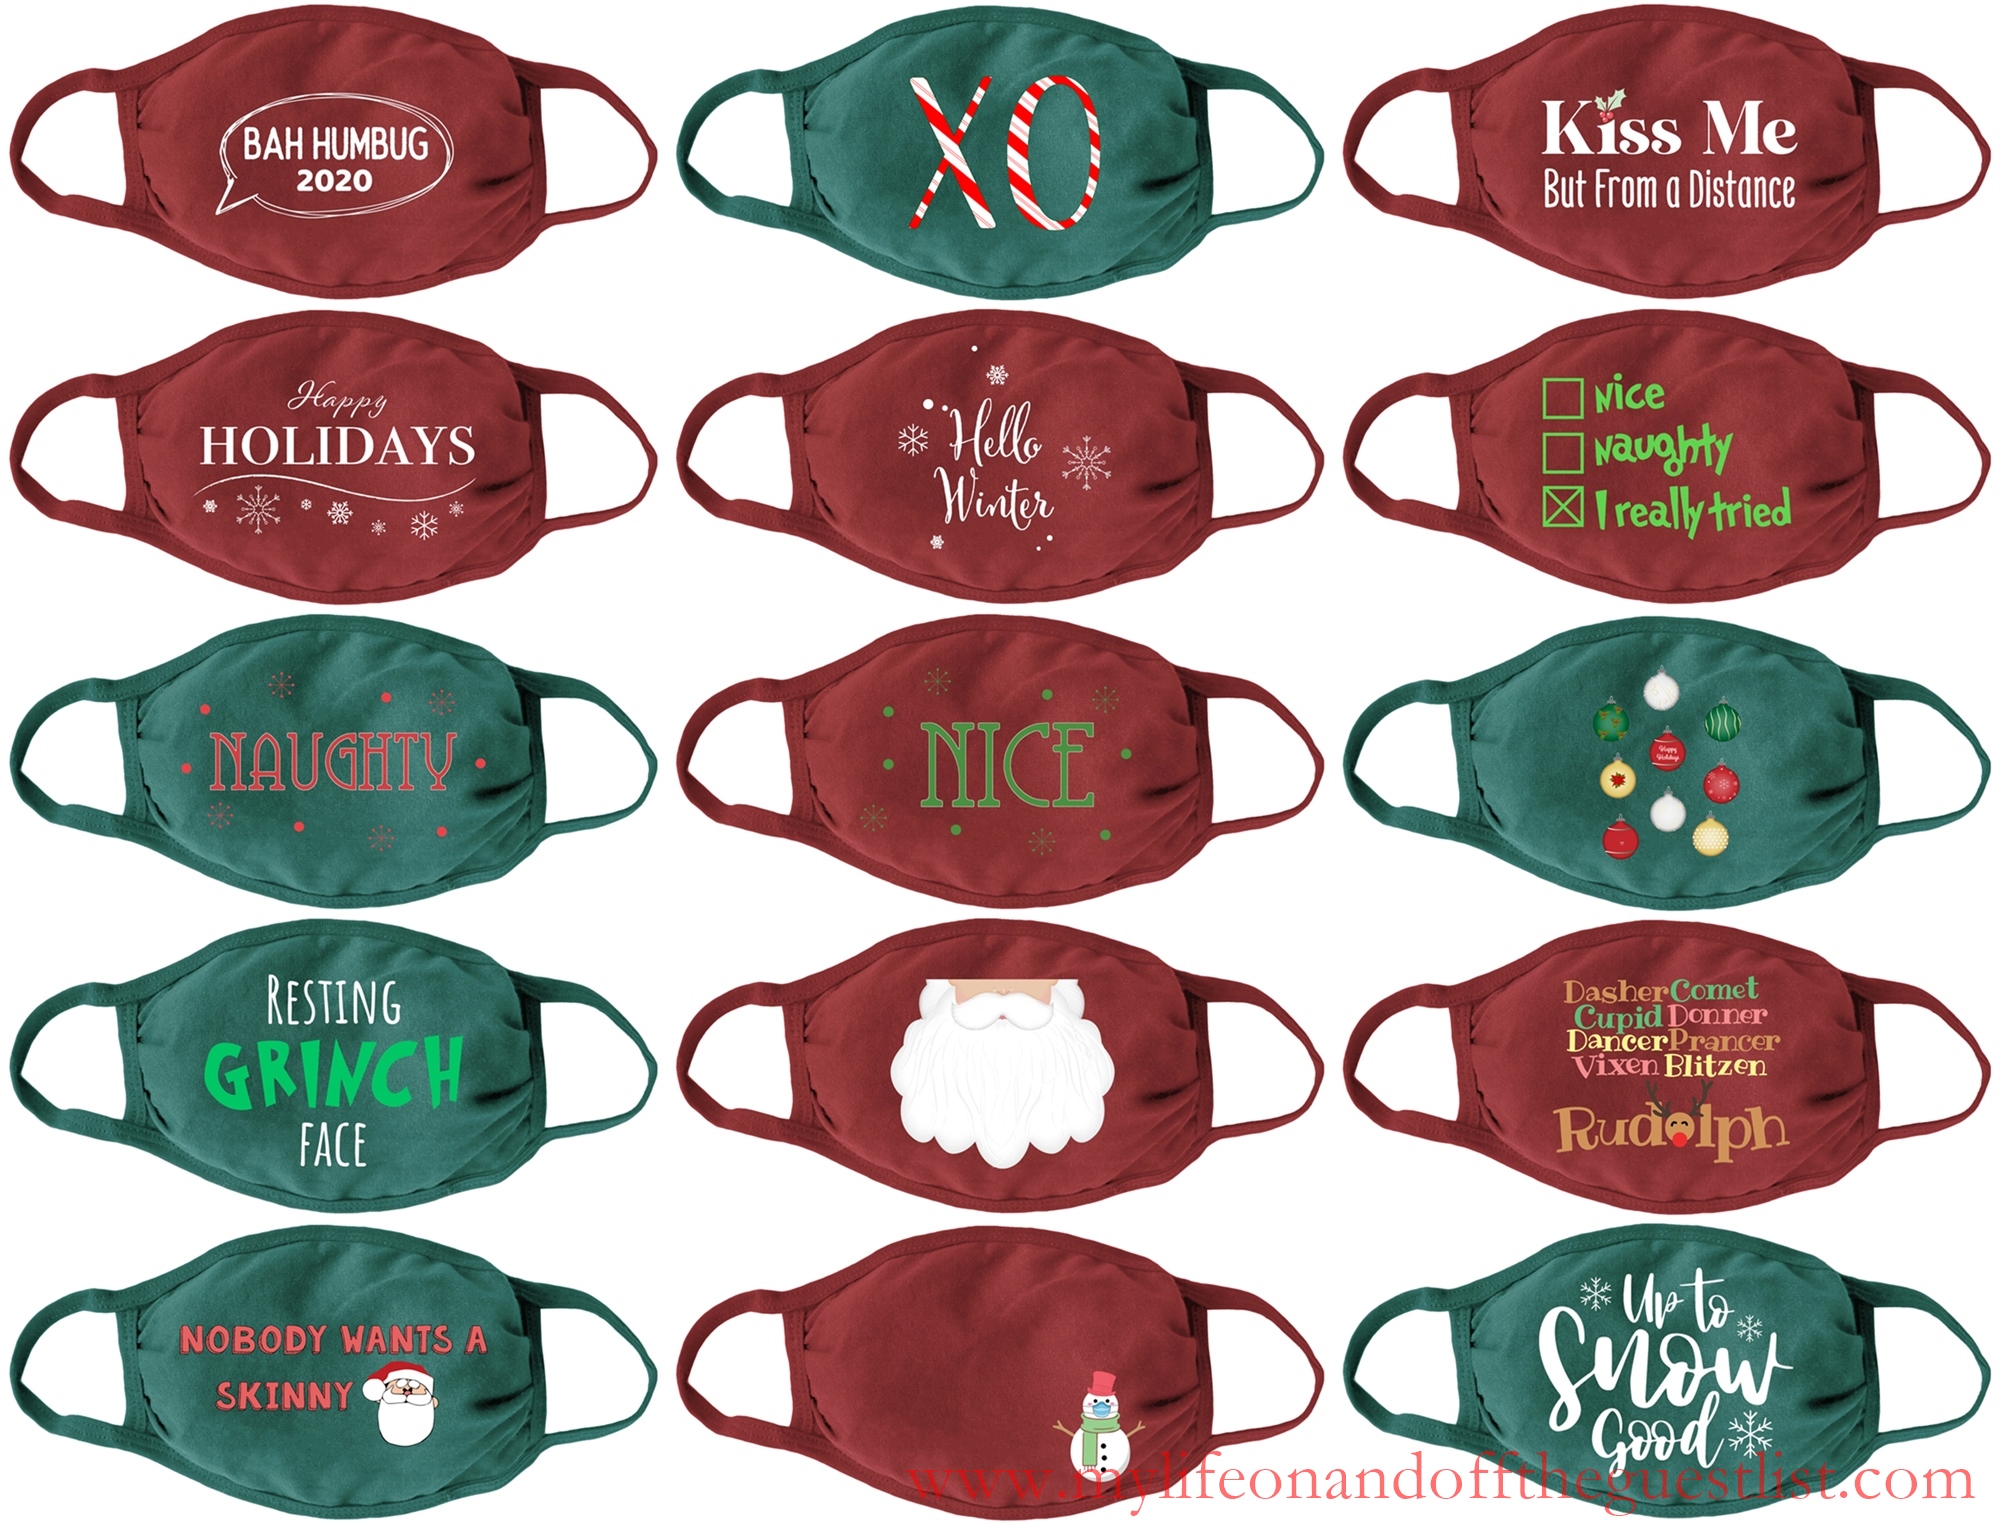 Giftgowns Holiday Masks: Share Your Holiday Spirit While Staying Safe